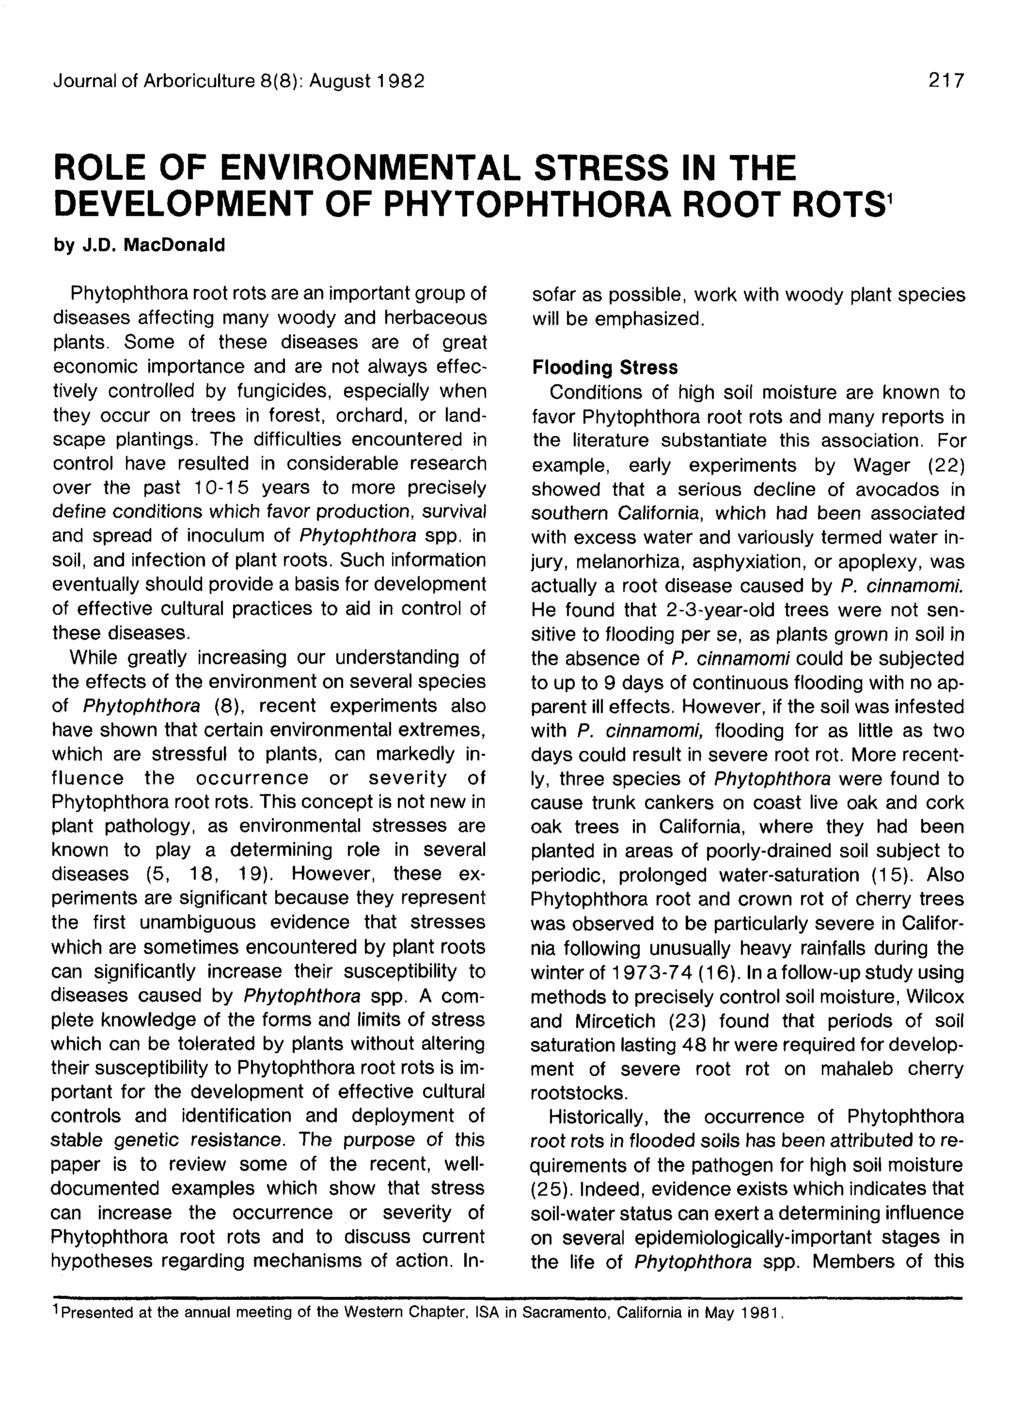 Journal of Arboriculture 8(8): August 1 982 217 ROLE OF ENVIRONMENTAL STRESS IN THE DEVELOPMENT OF PHYTOPHTHORA ROOT ROTS 1 by J.D. MacDonald Phytophthora root rots are an important group of diseases affecting many woody and herbaceous plants.